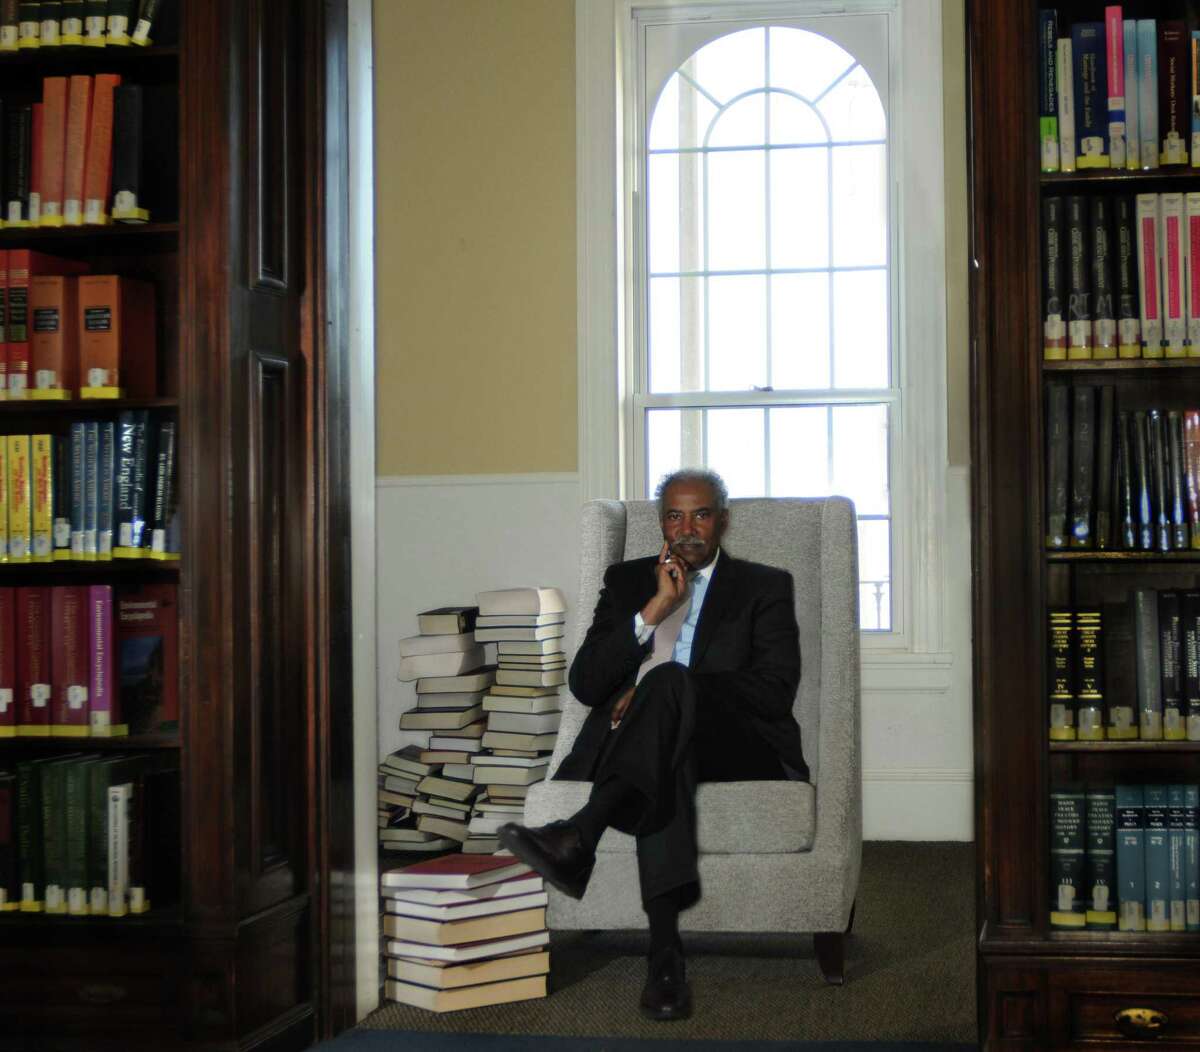 NEW HAVEN_Professor Norman Davis, of Albertus Magnus College, in the school library. Davis has written a book called "The Black Quarterback Syndrome:How to Succeed As a First or Pioneer in an Organization." Melanie Stengel/Register